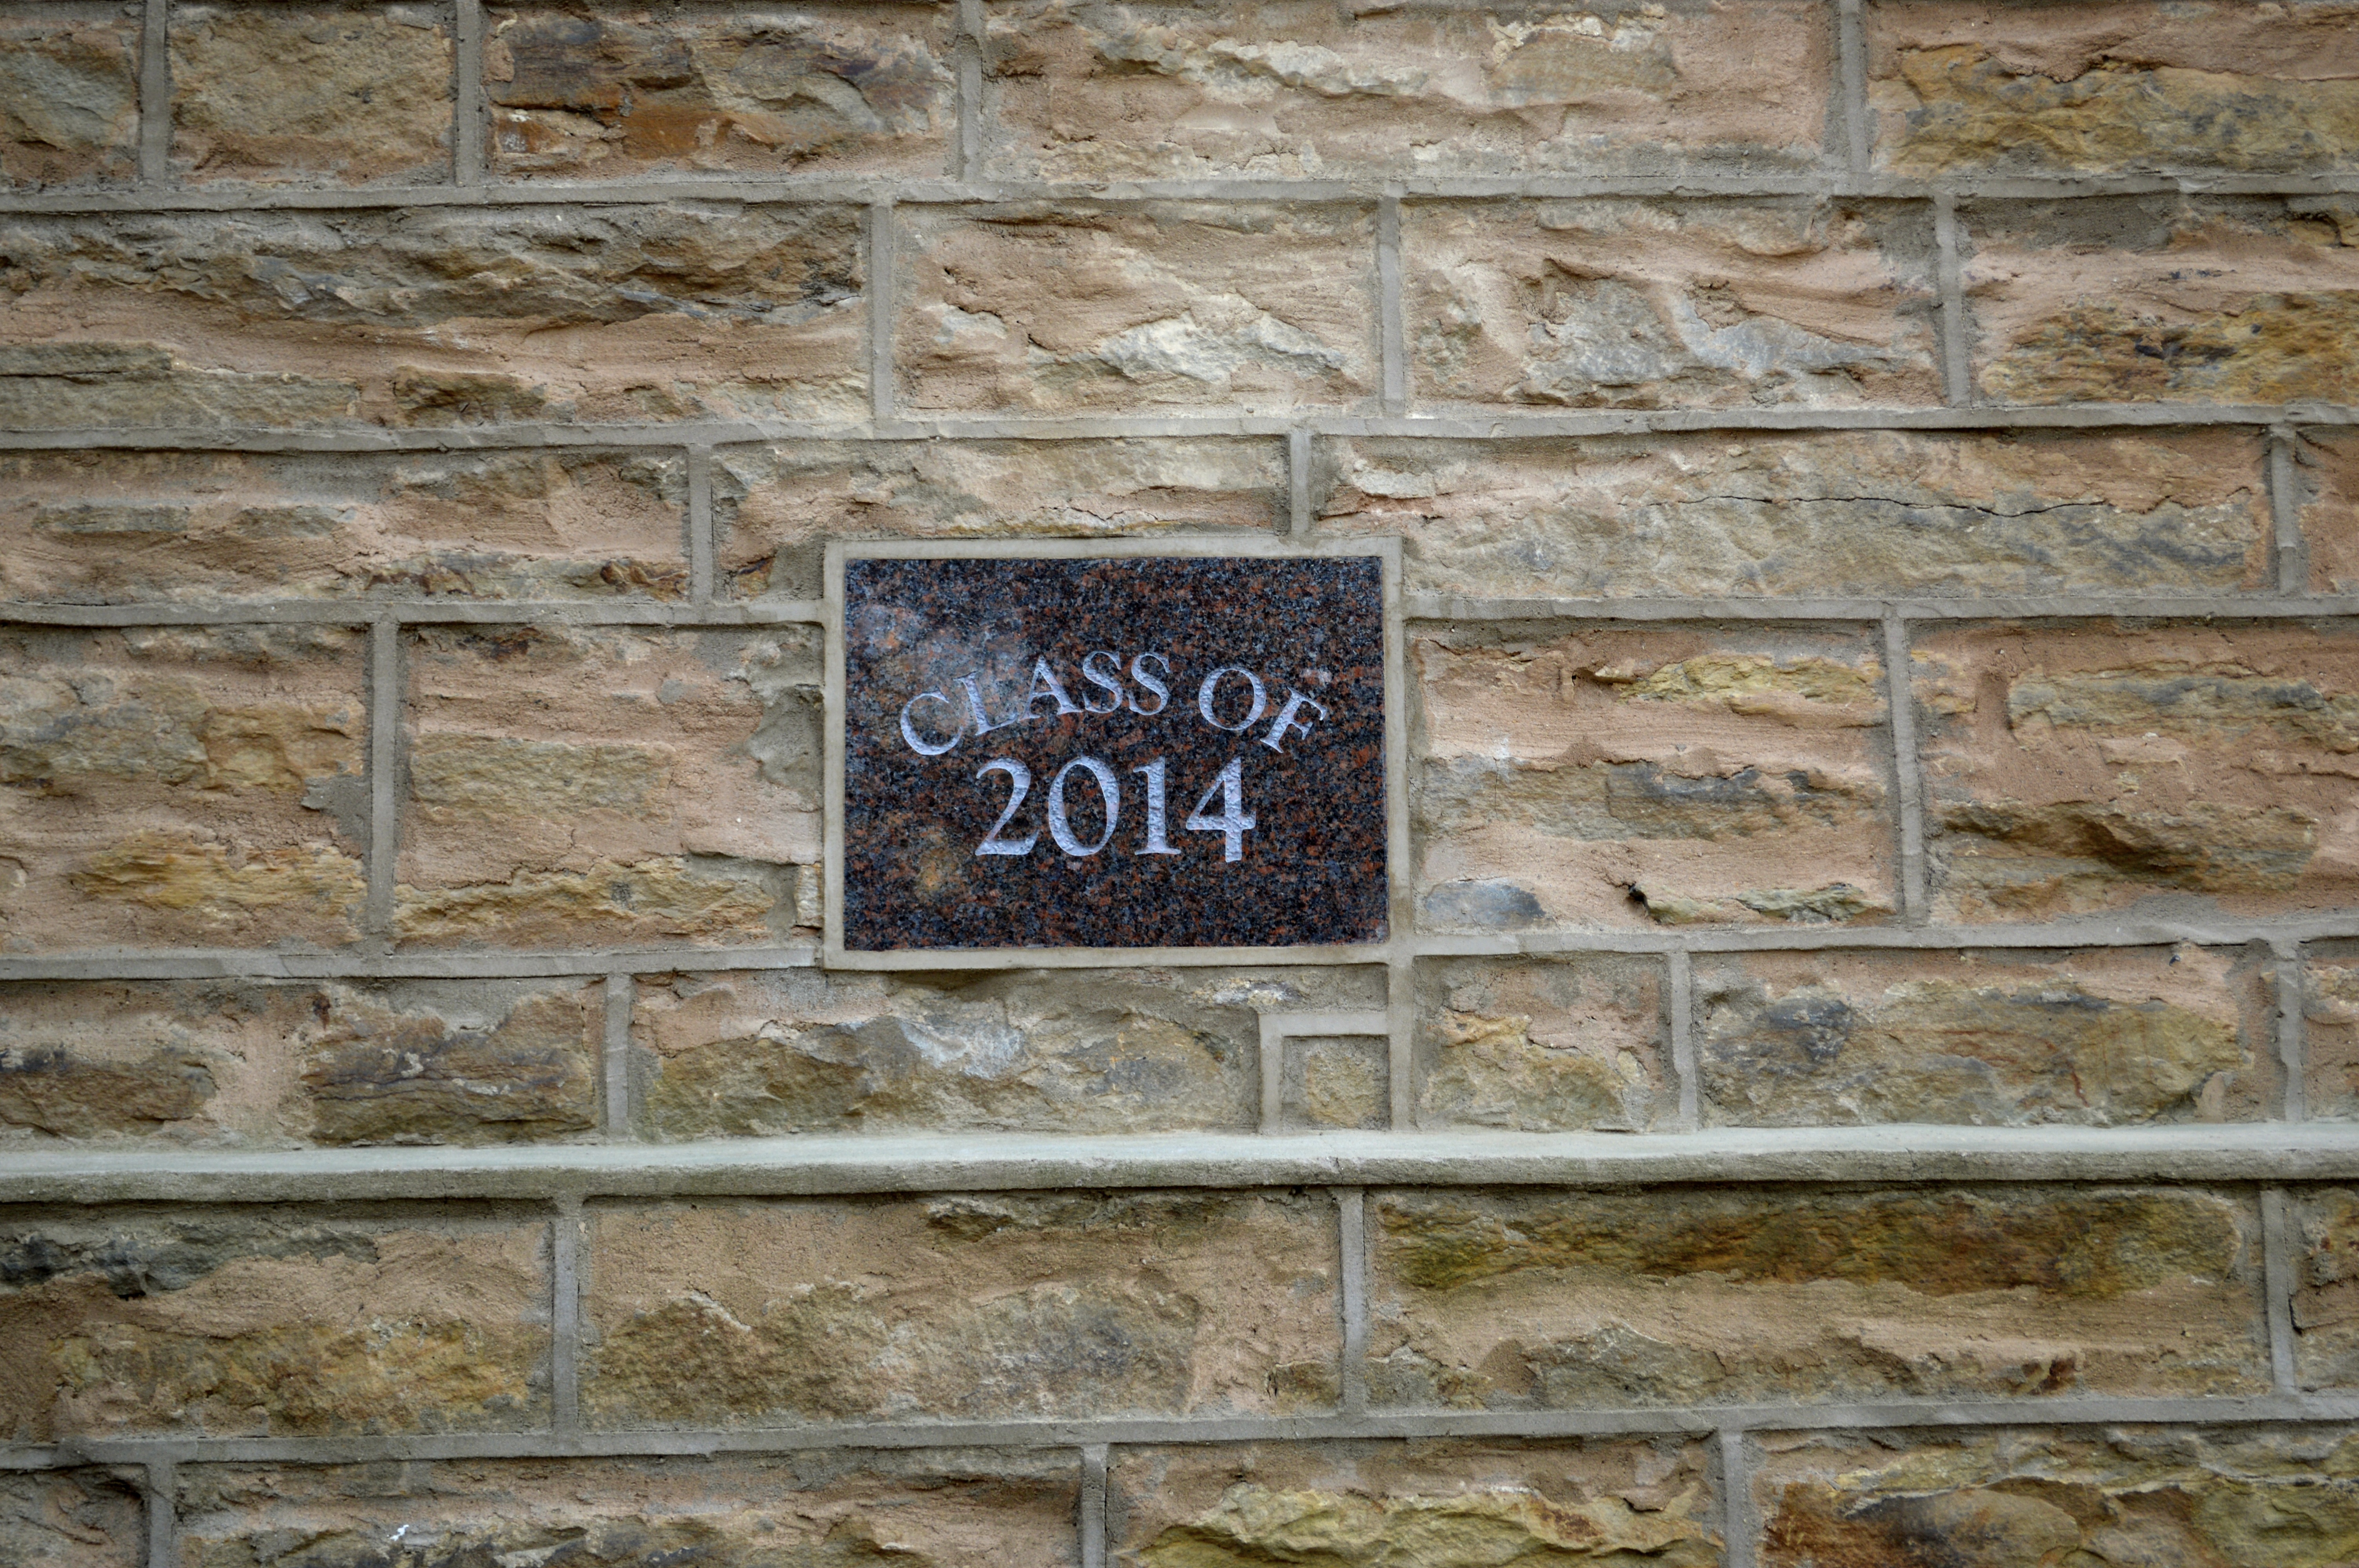 The "Class of 2014" Plaque